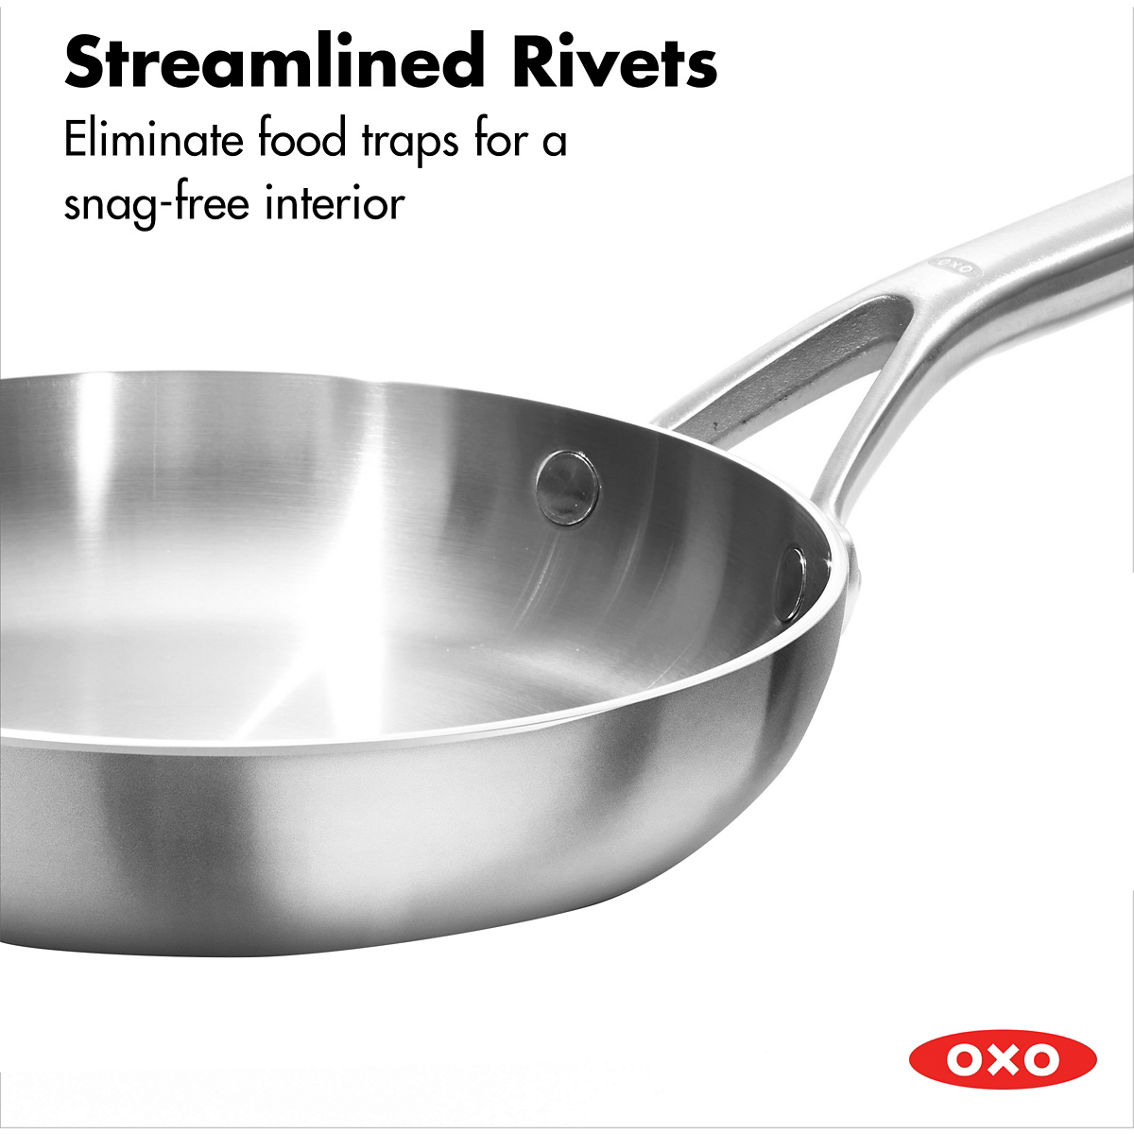 OXO Mira 3-Ply Stainless Steel Frying Pan - Image 5 of 6